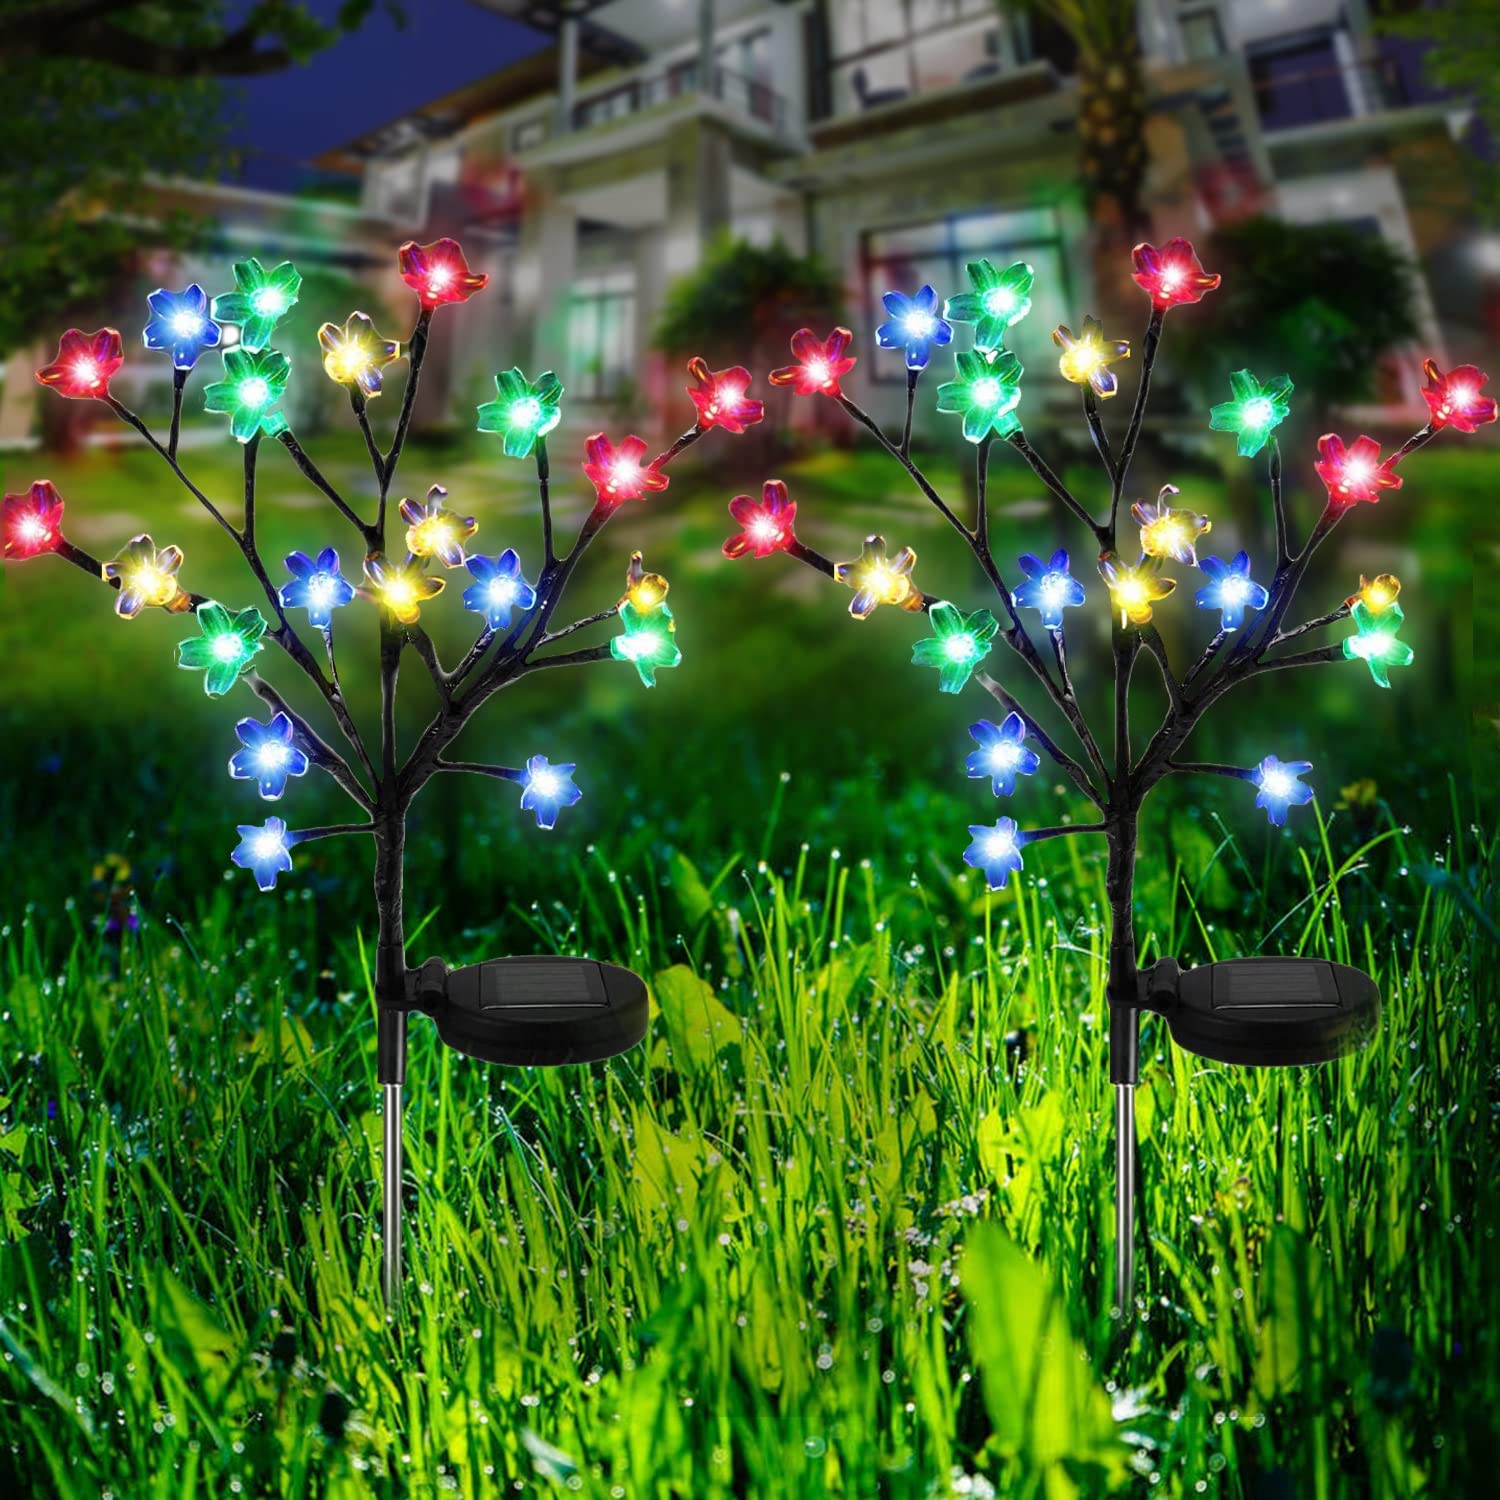 Garden Solar Lights Outdoor Decorative - LED Solar Powered Fairy Landscape Tree Lights,Beautiful Solar Flower Lights for Pathway Patio Yard Deck Walkway|Christmas Party Decor 2Pack - image 1 of 8